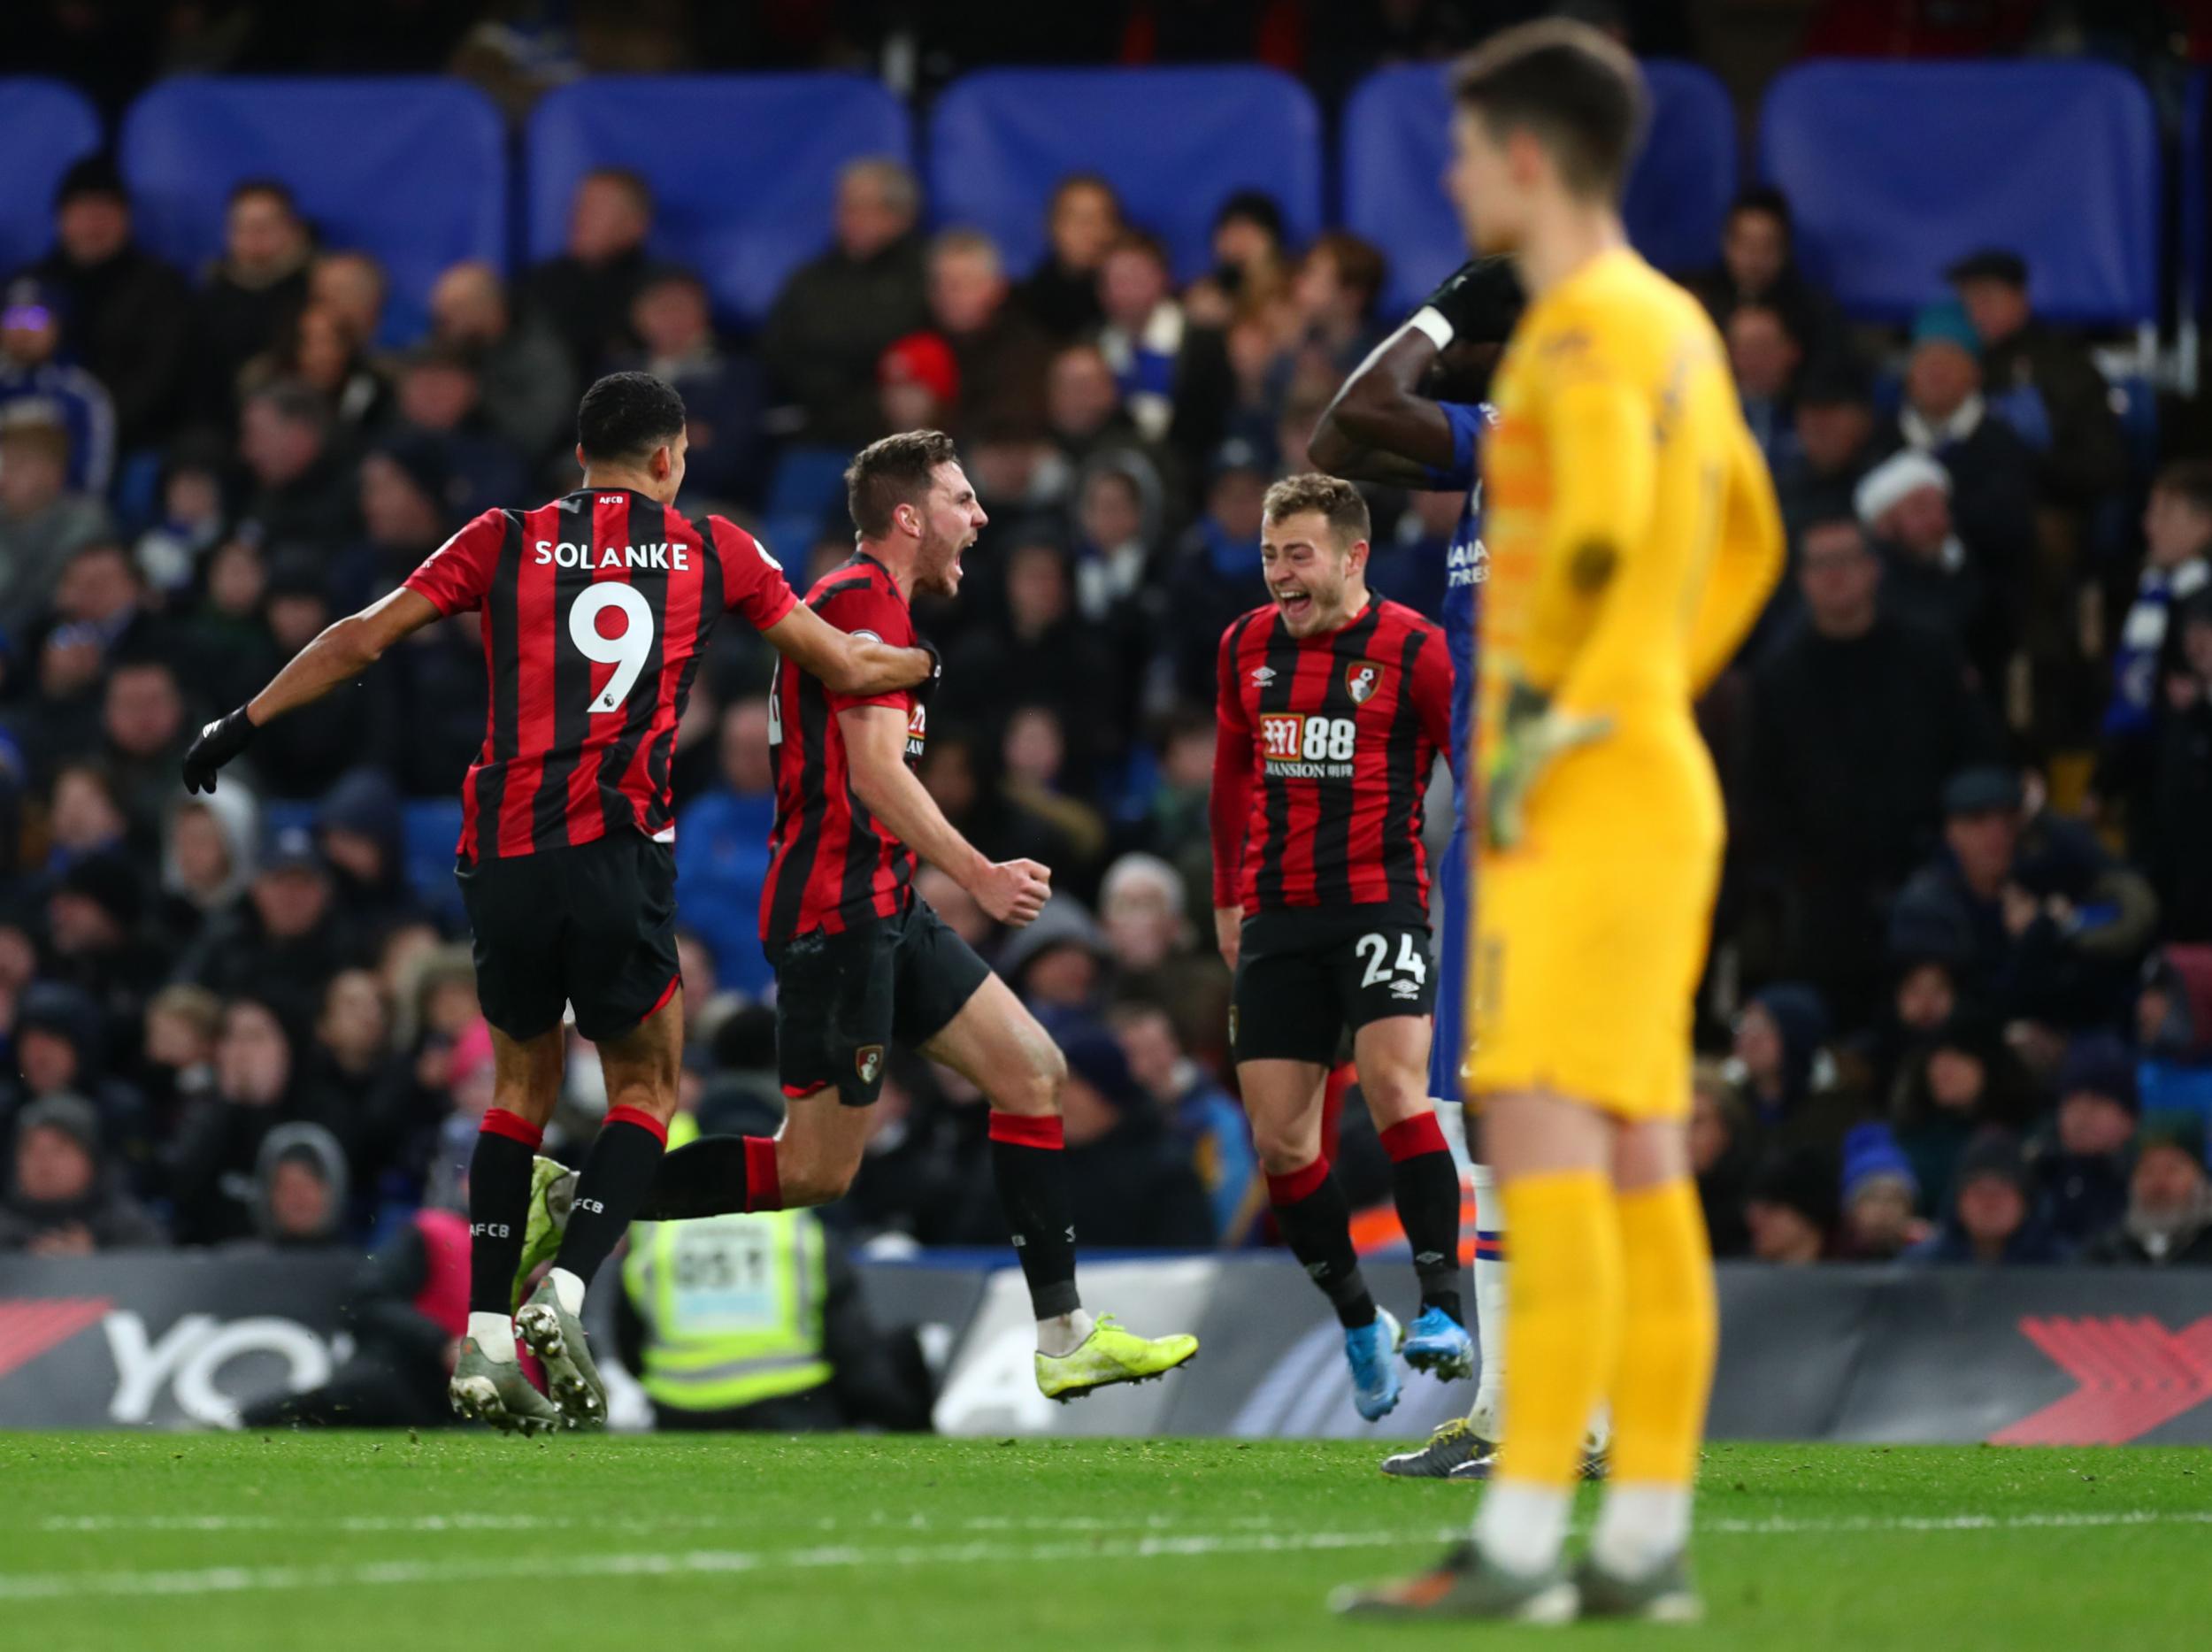 Dan Gosling's late goal gives Bournemouth vital win and leaves Chelsea looking over their shoulder